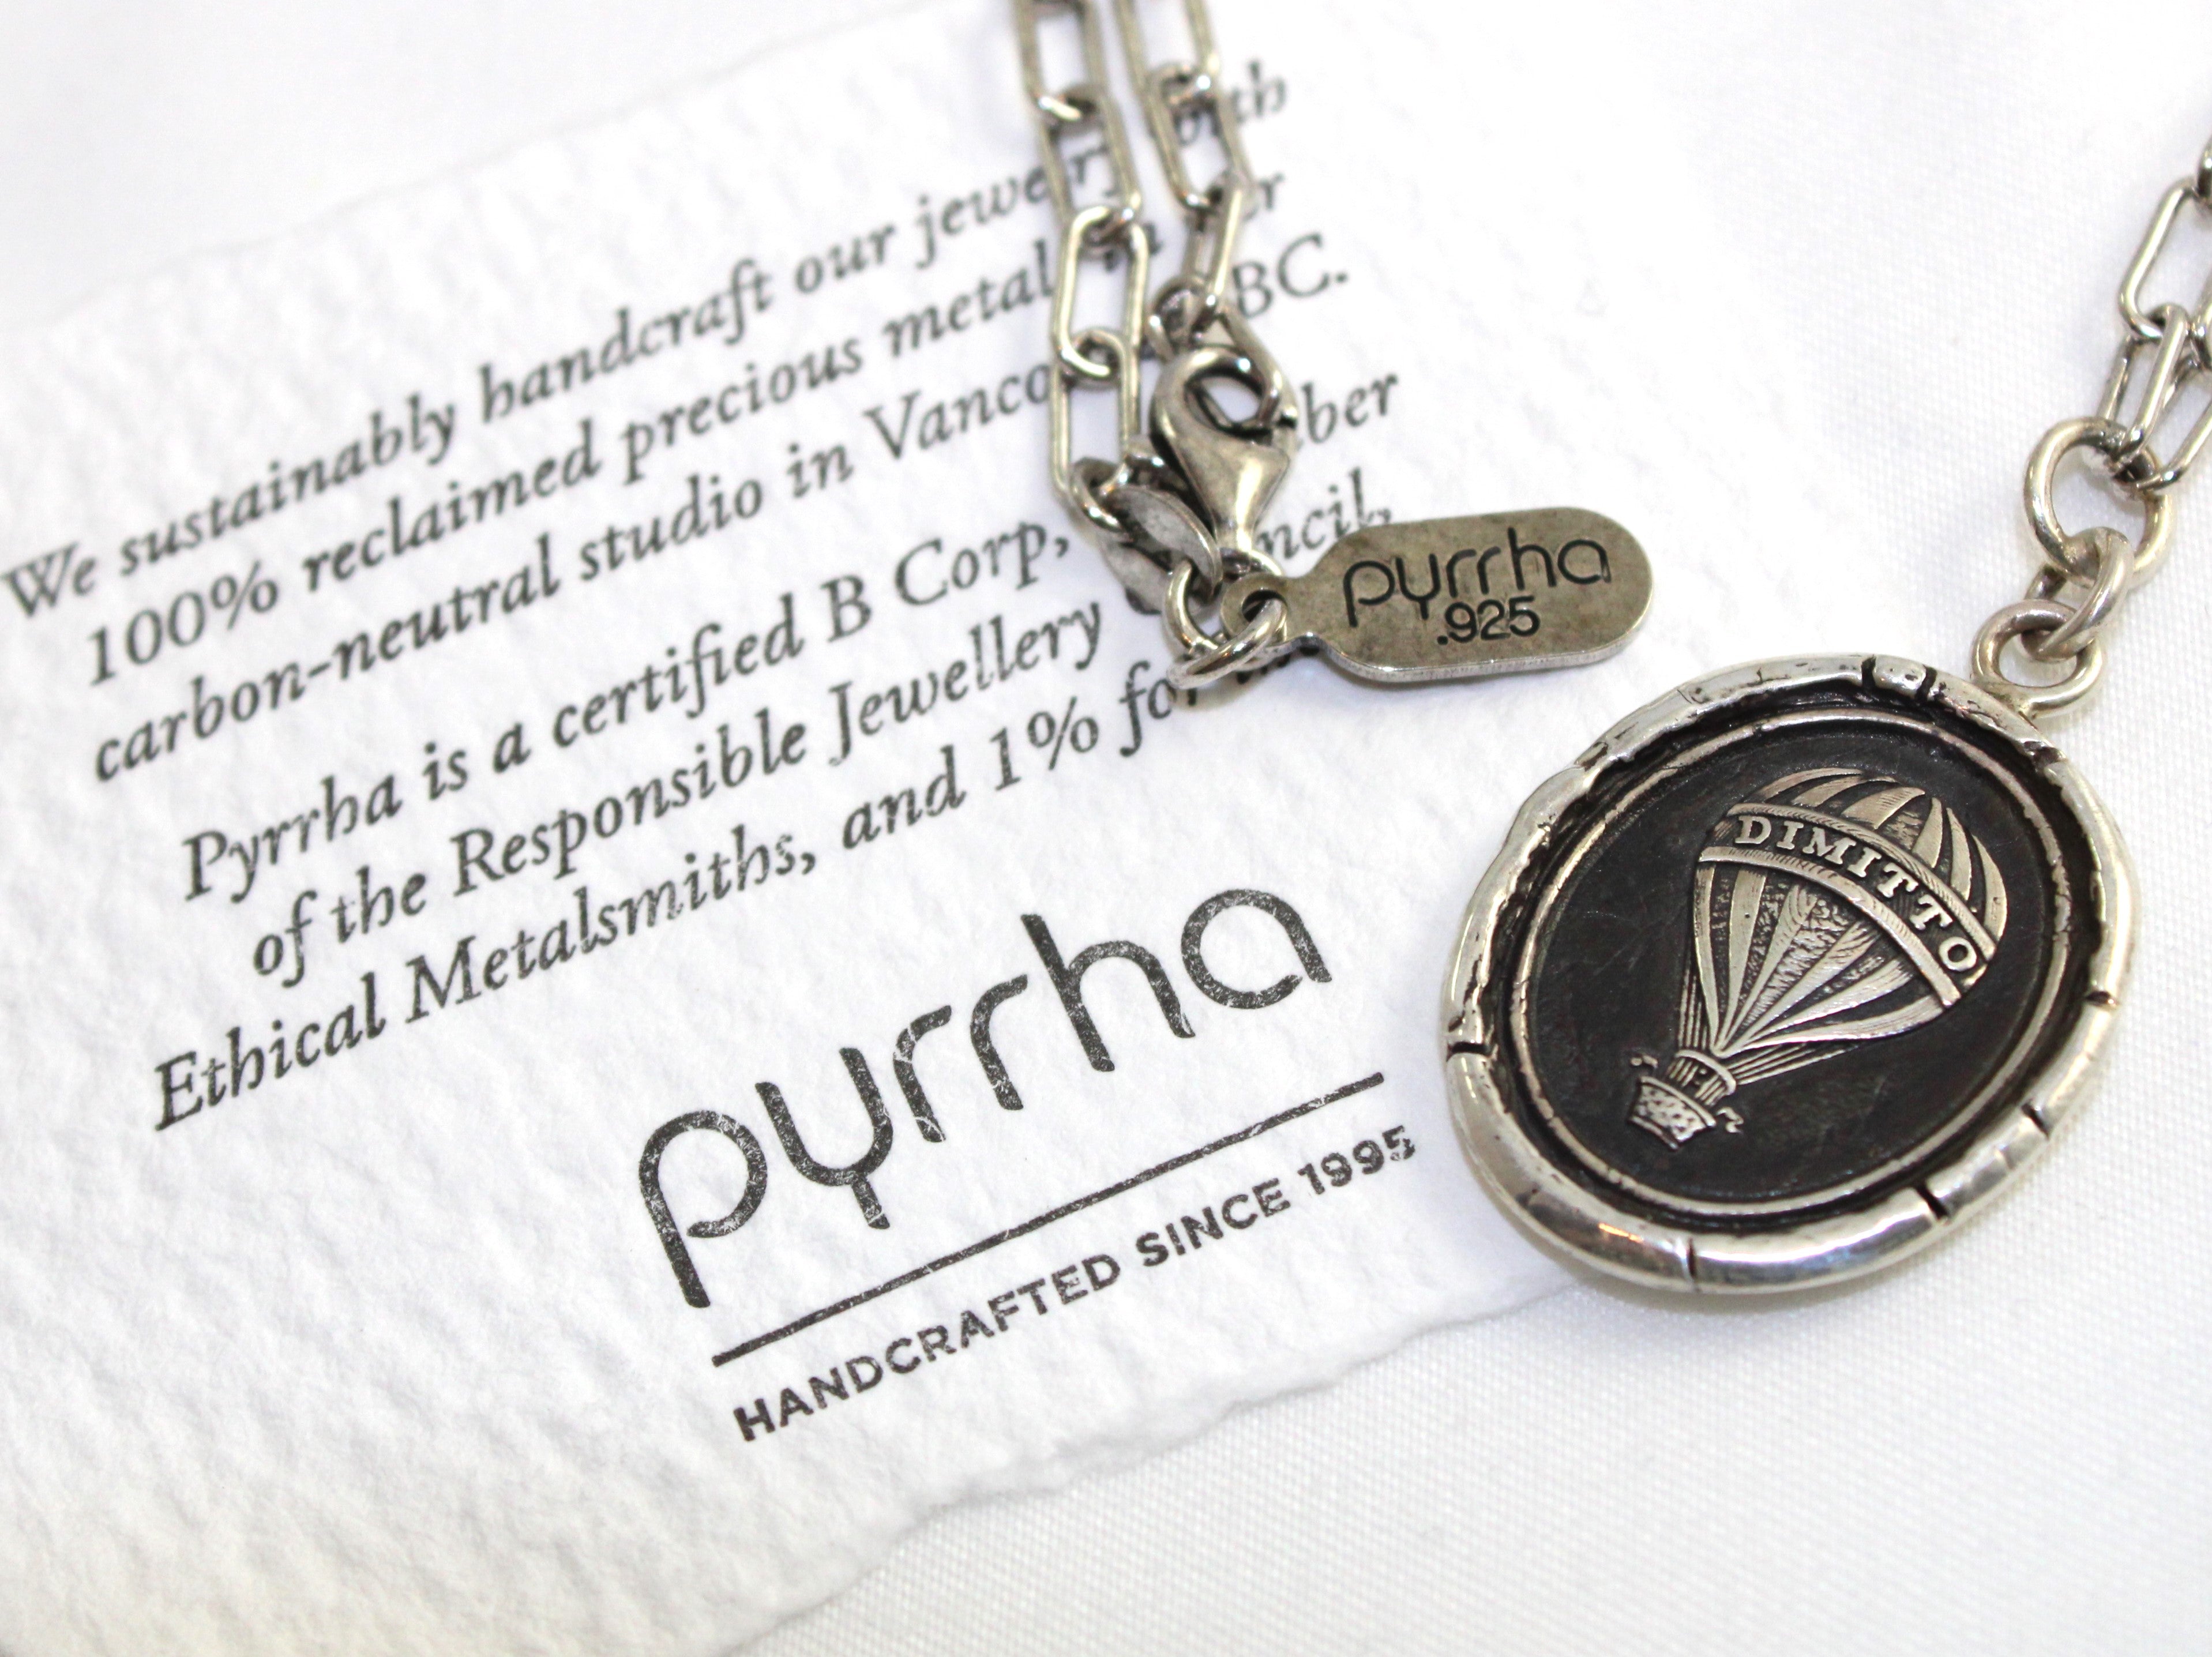 Pyrrha Sterling Silver "Let Go Of Fear" Talisman Pendant 18" Paperclip Chain Necklace